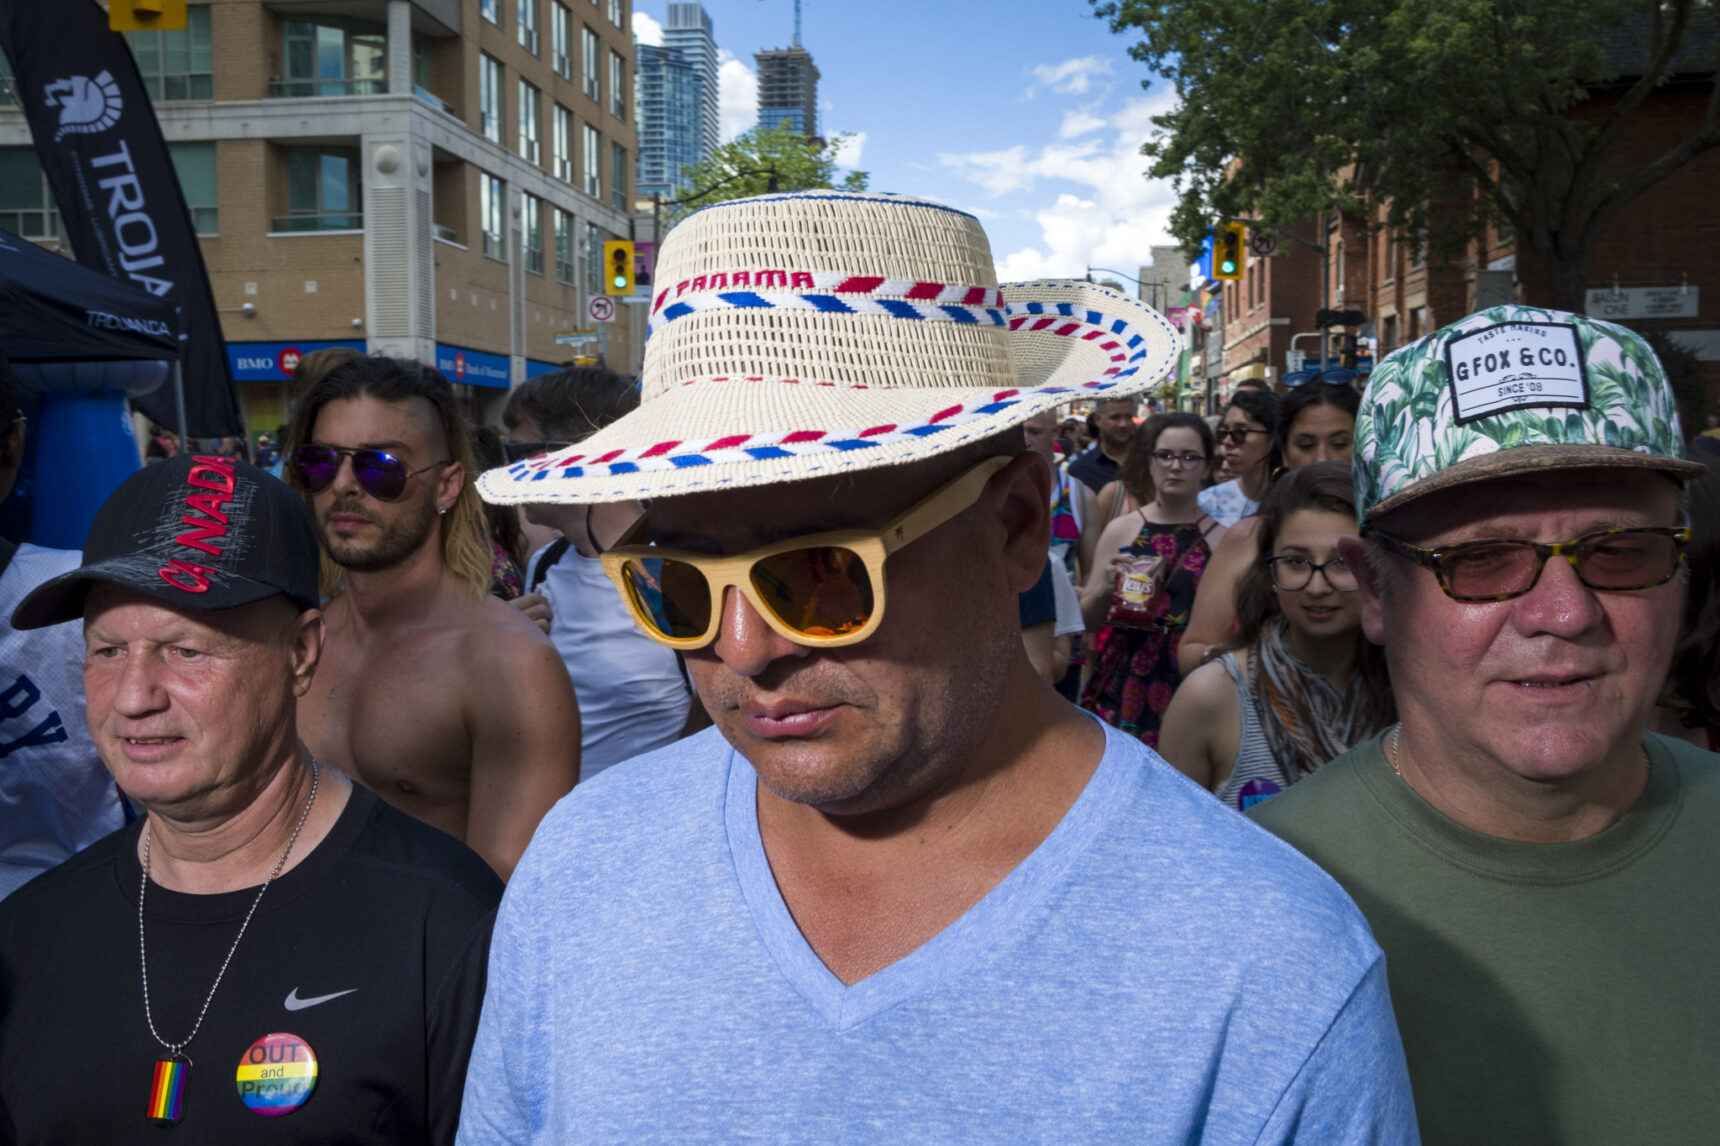 flash street photography - toronto pride - people will look at you